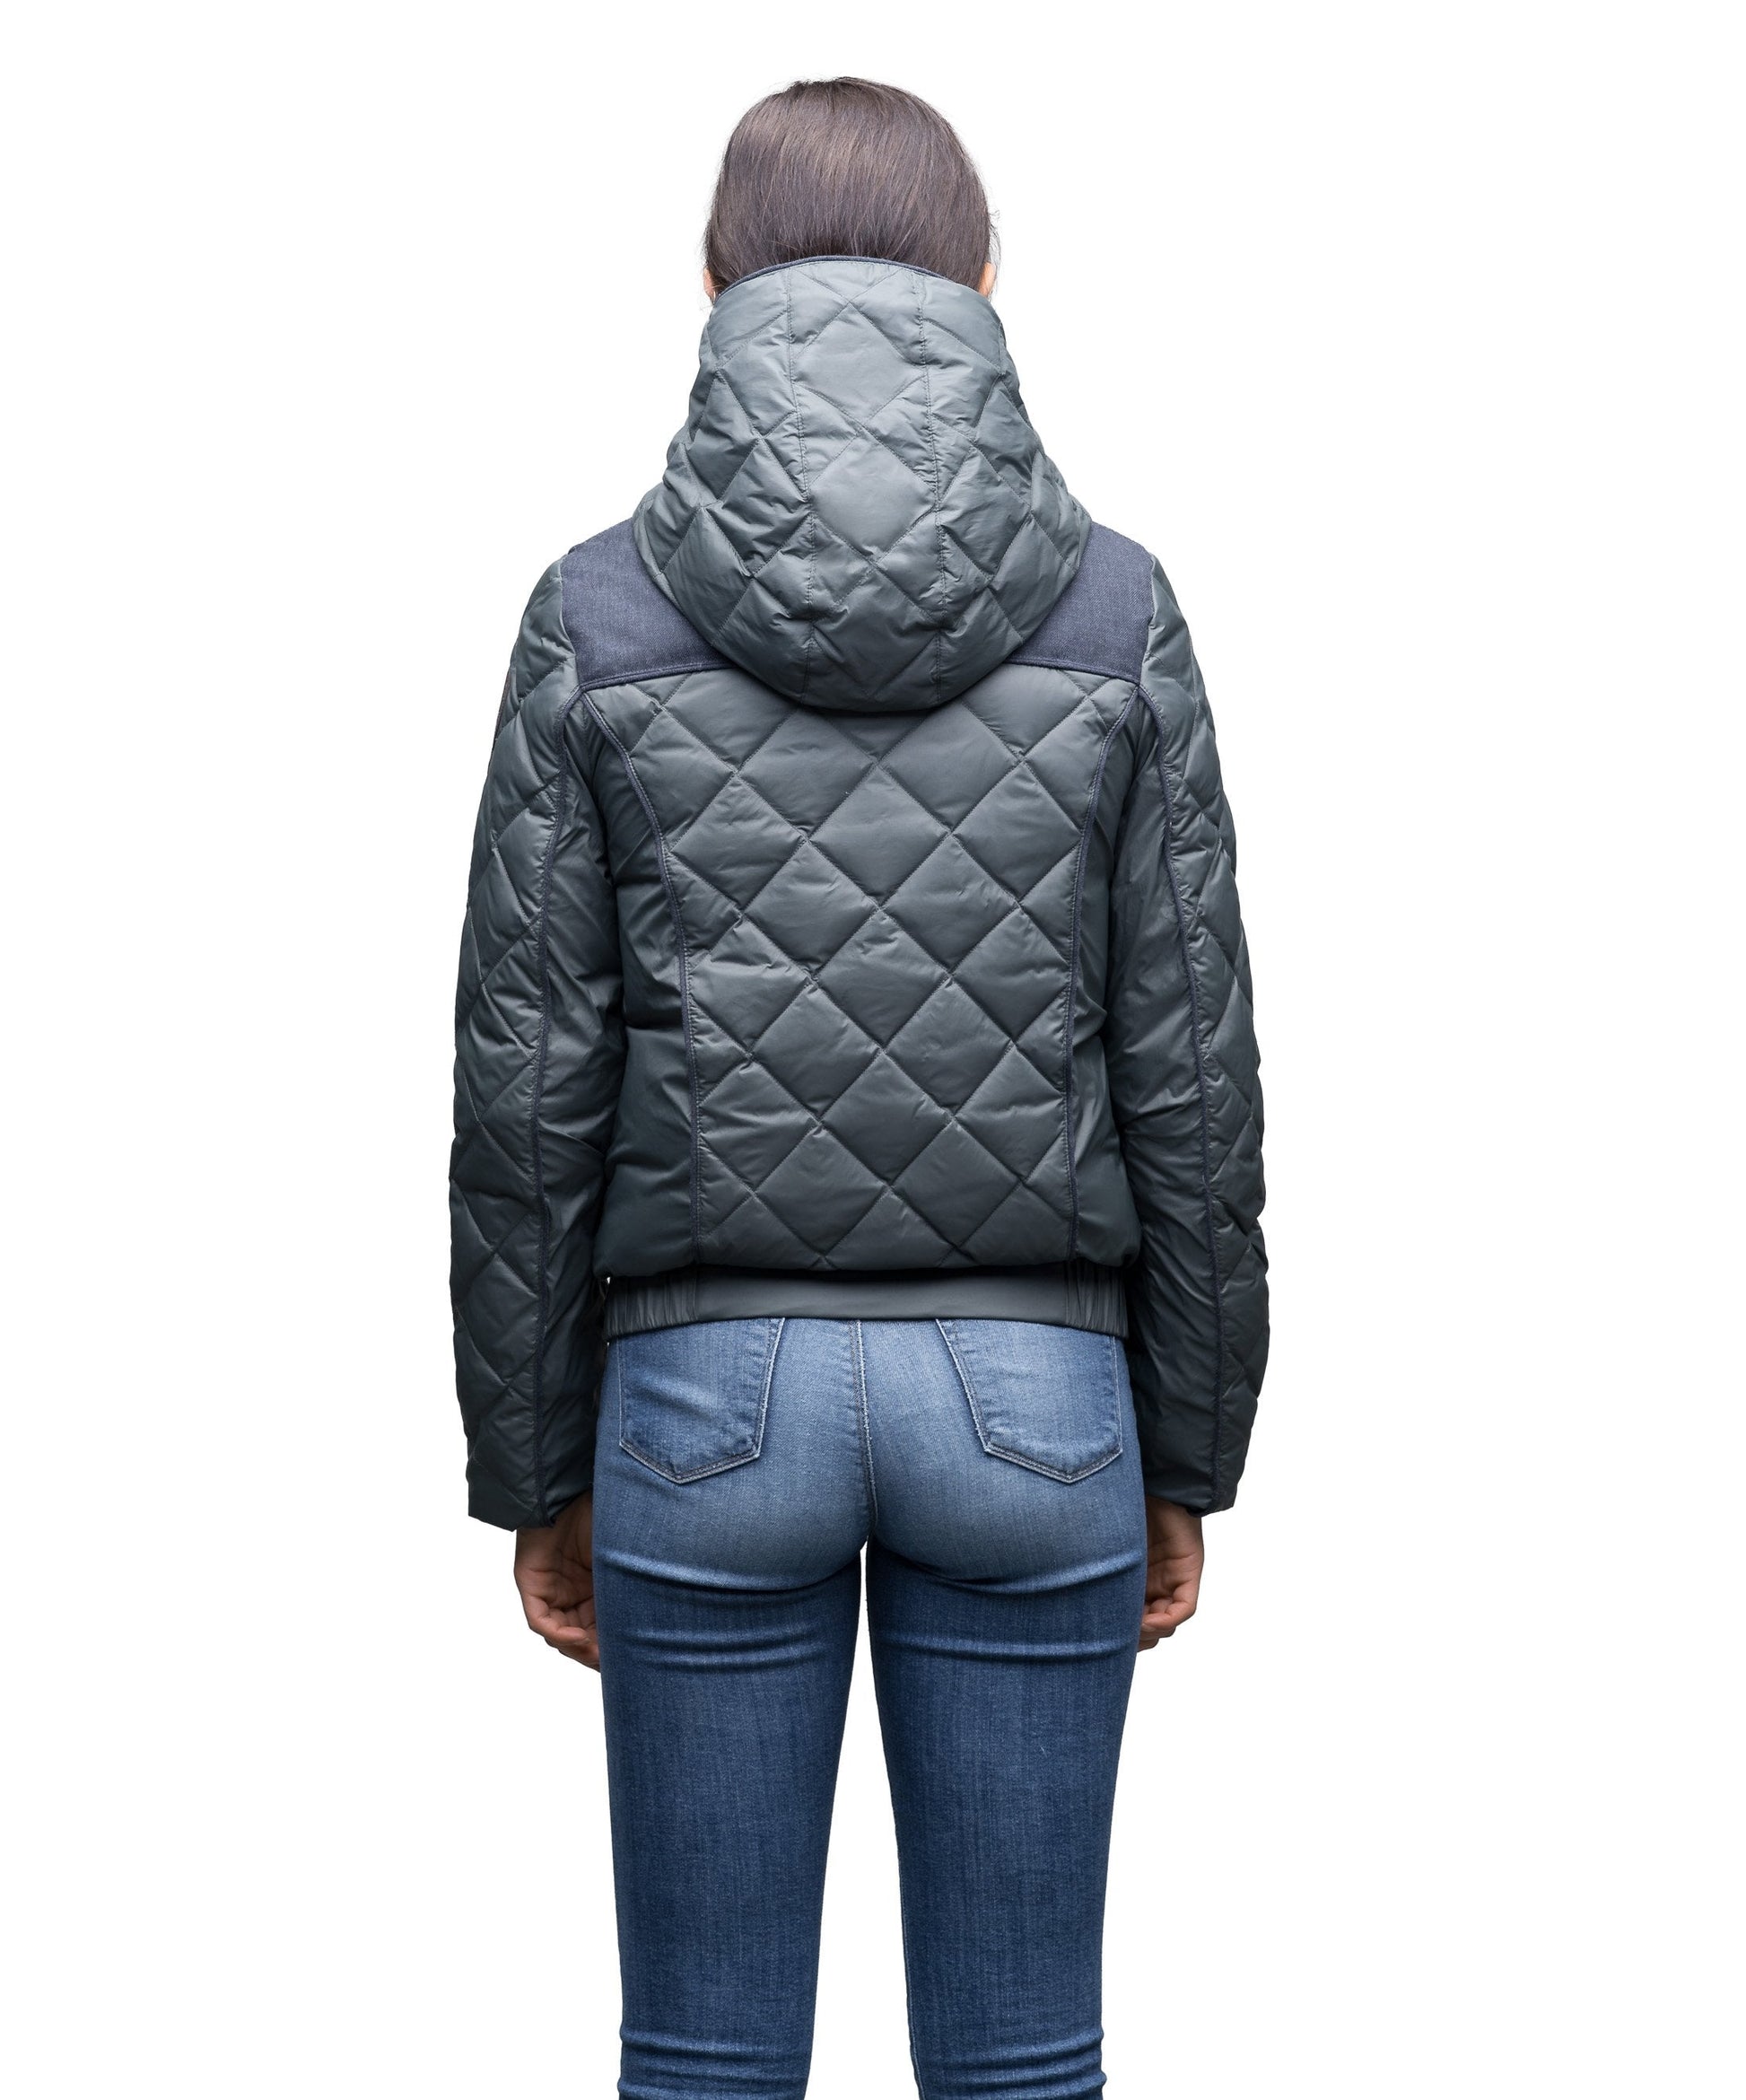 Lightweight women's jacket with hood and quilted pattern featuring a contrasting upper fabric in Foggy Blue